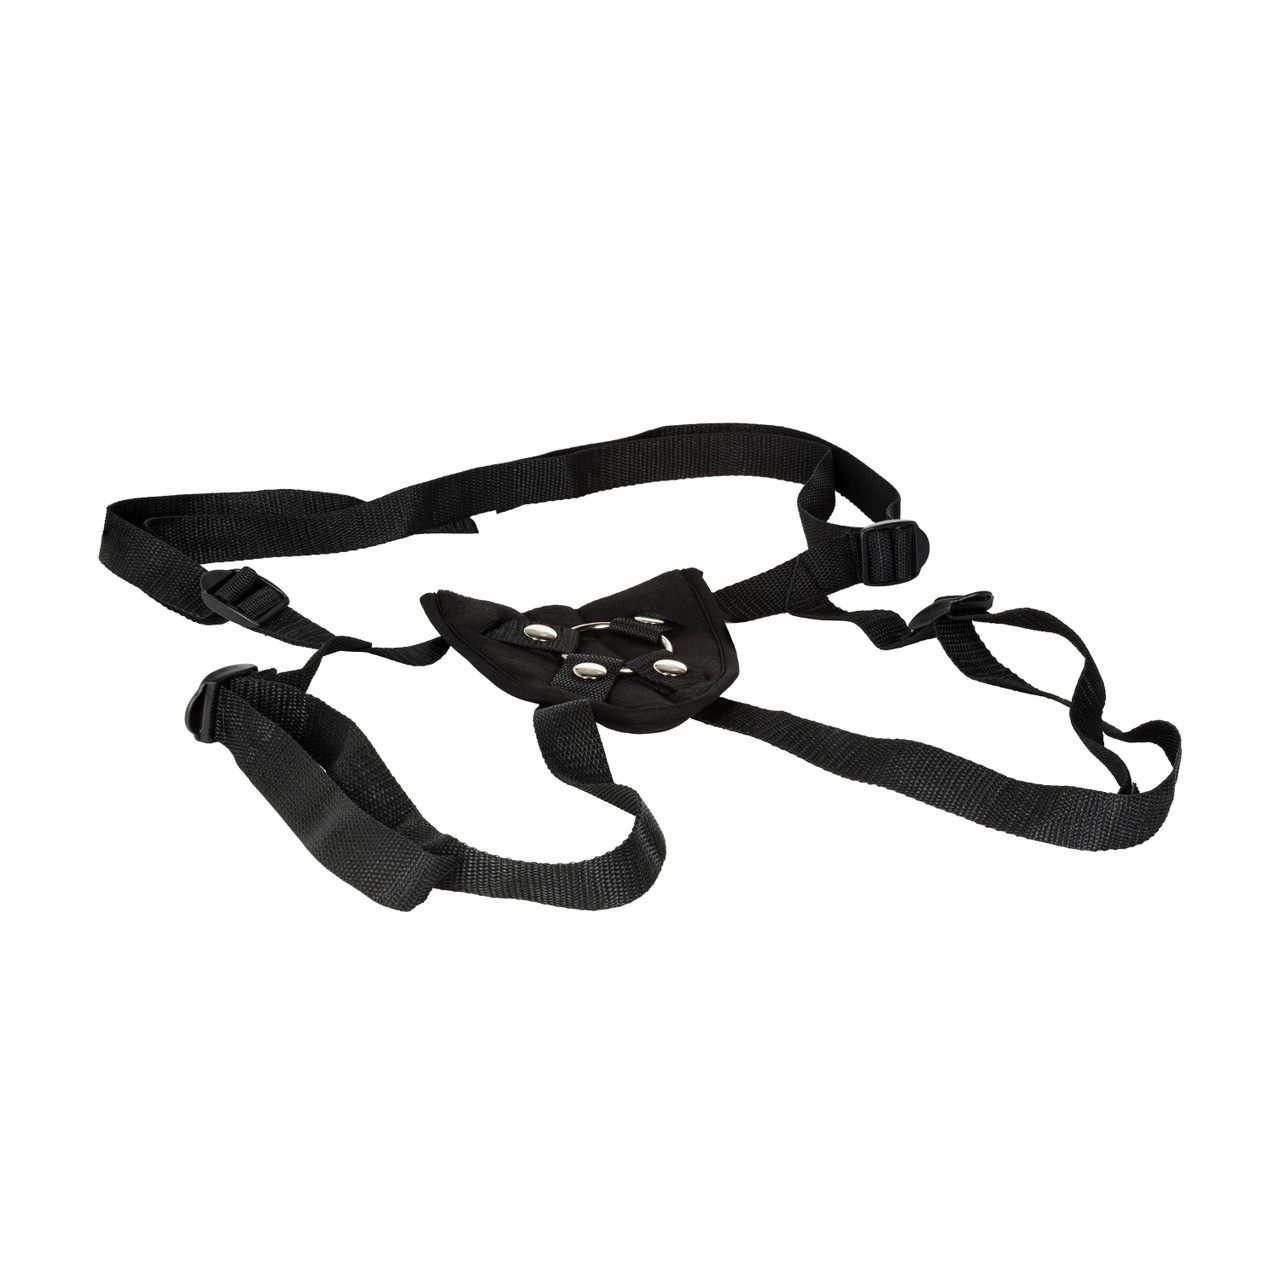 Pleasure Toys - Strap-On Harnesses - Plus Size Harnesses 49- 82 - Page 1  - SheVibe